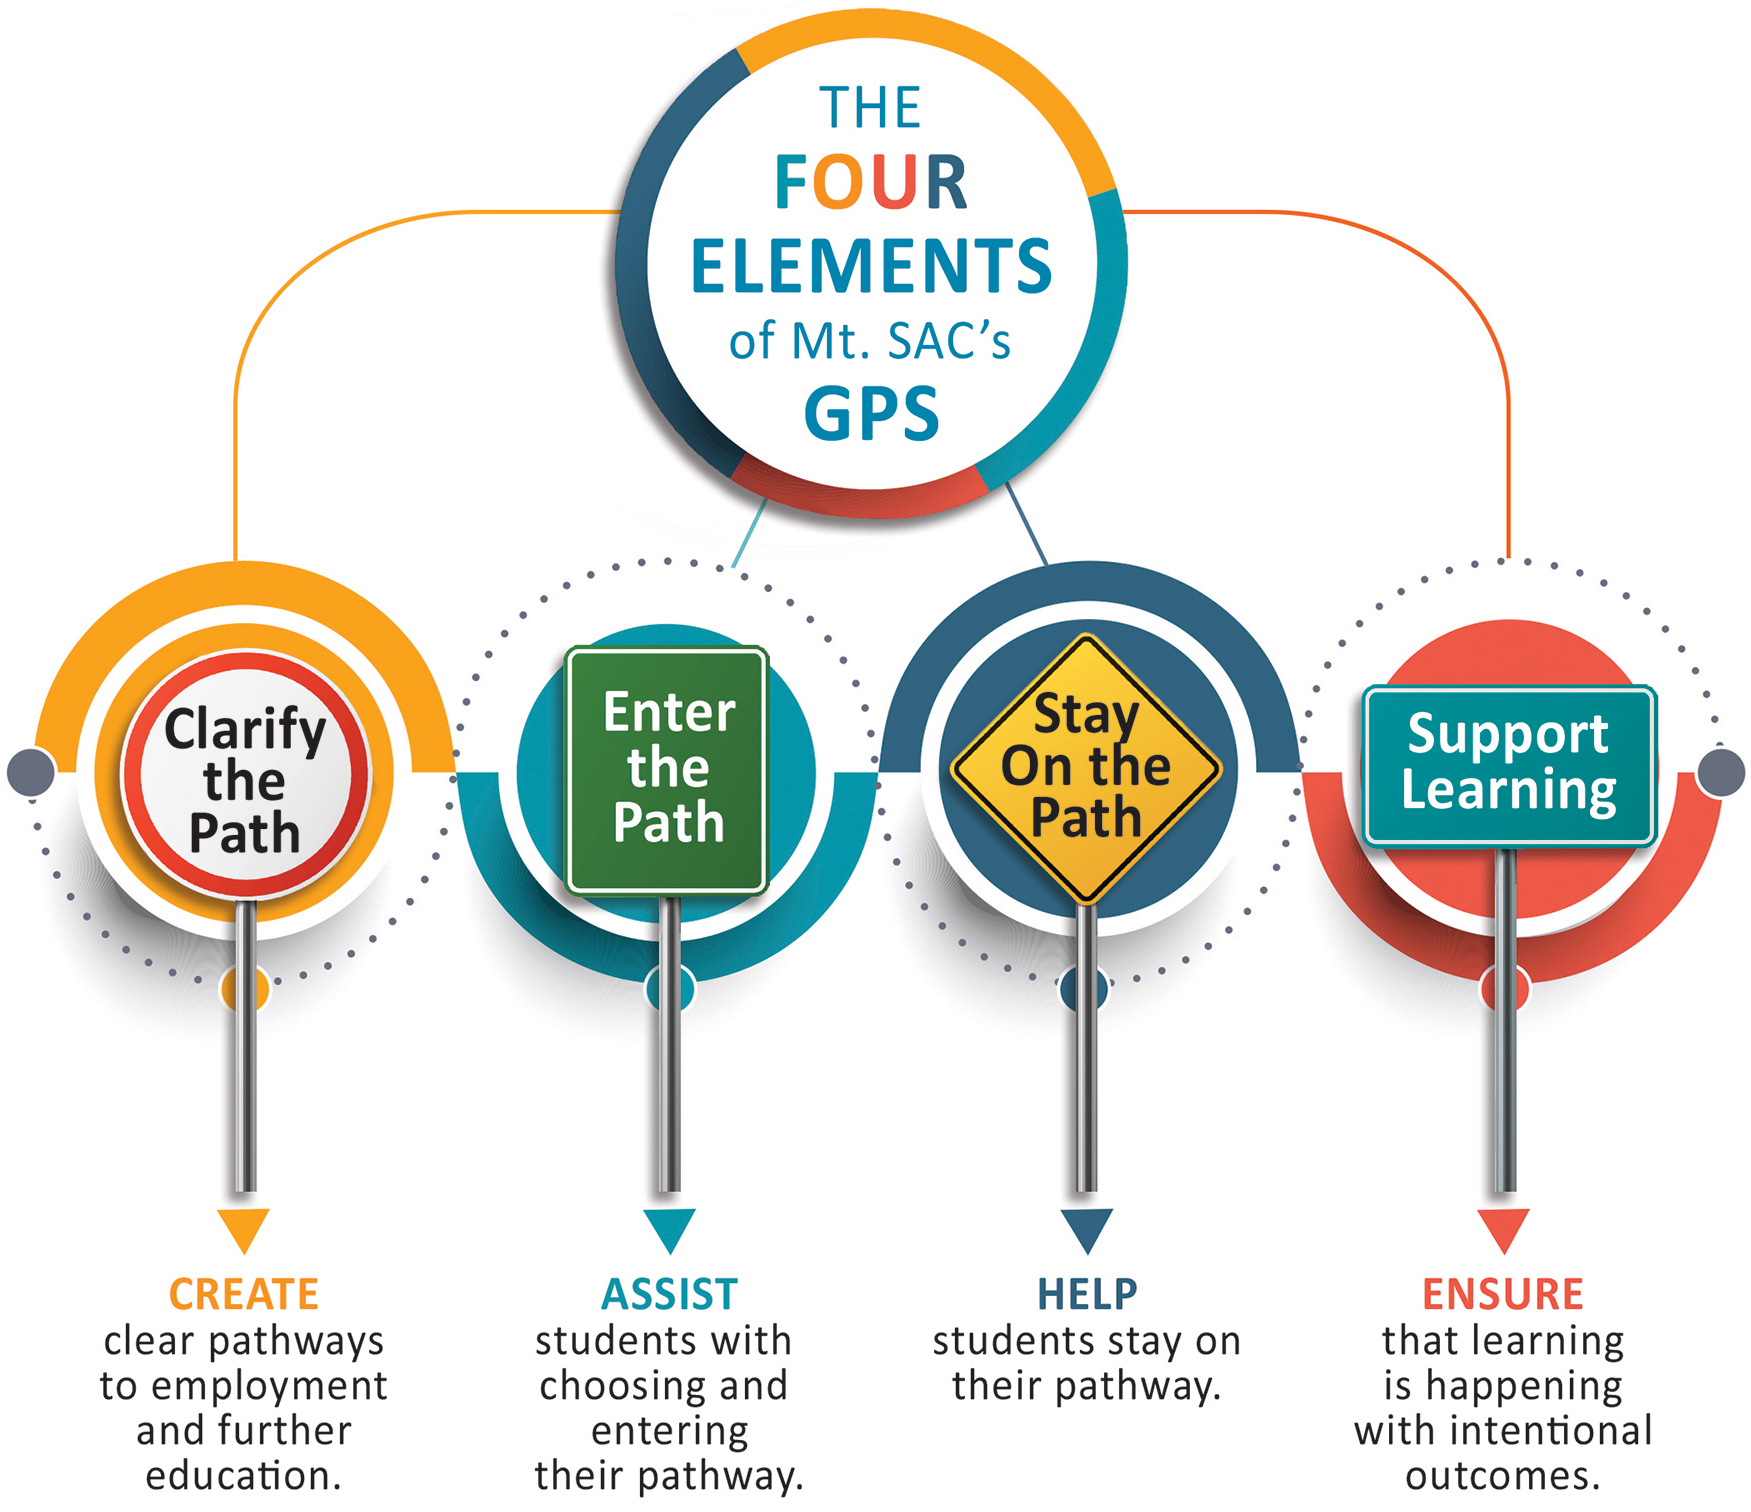 The four elements of Guided Pathways: Clarify the path, enter the path, stay on the path, support learning